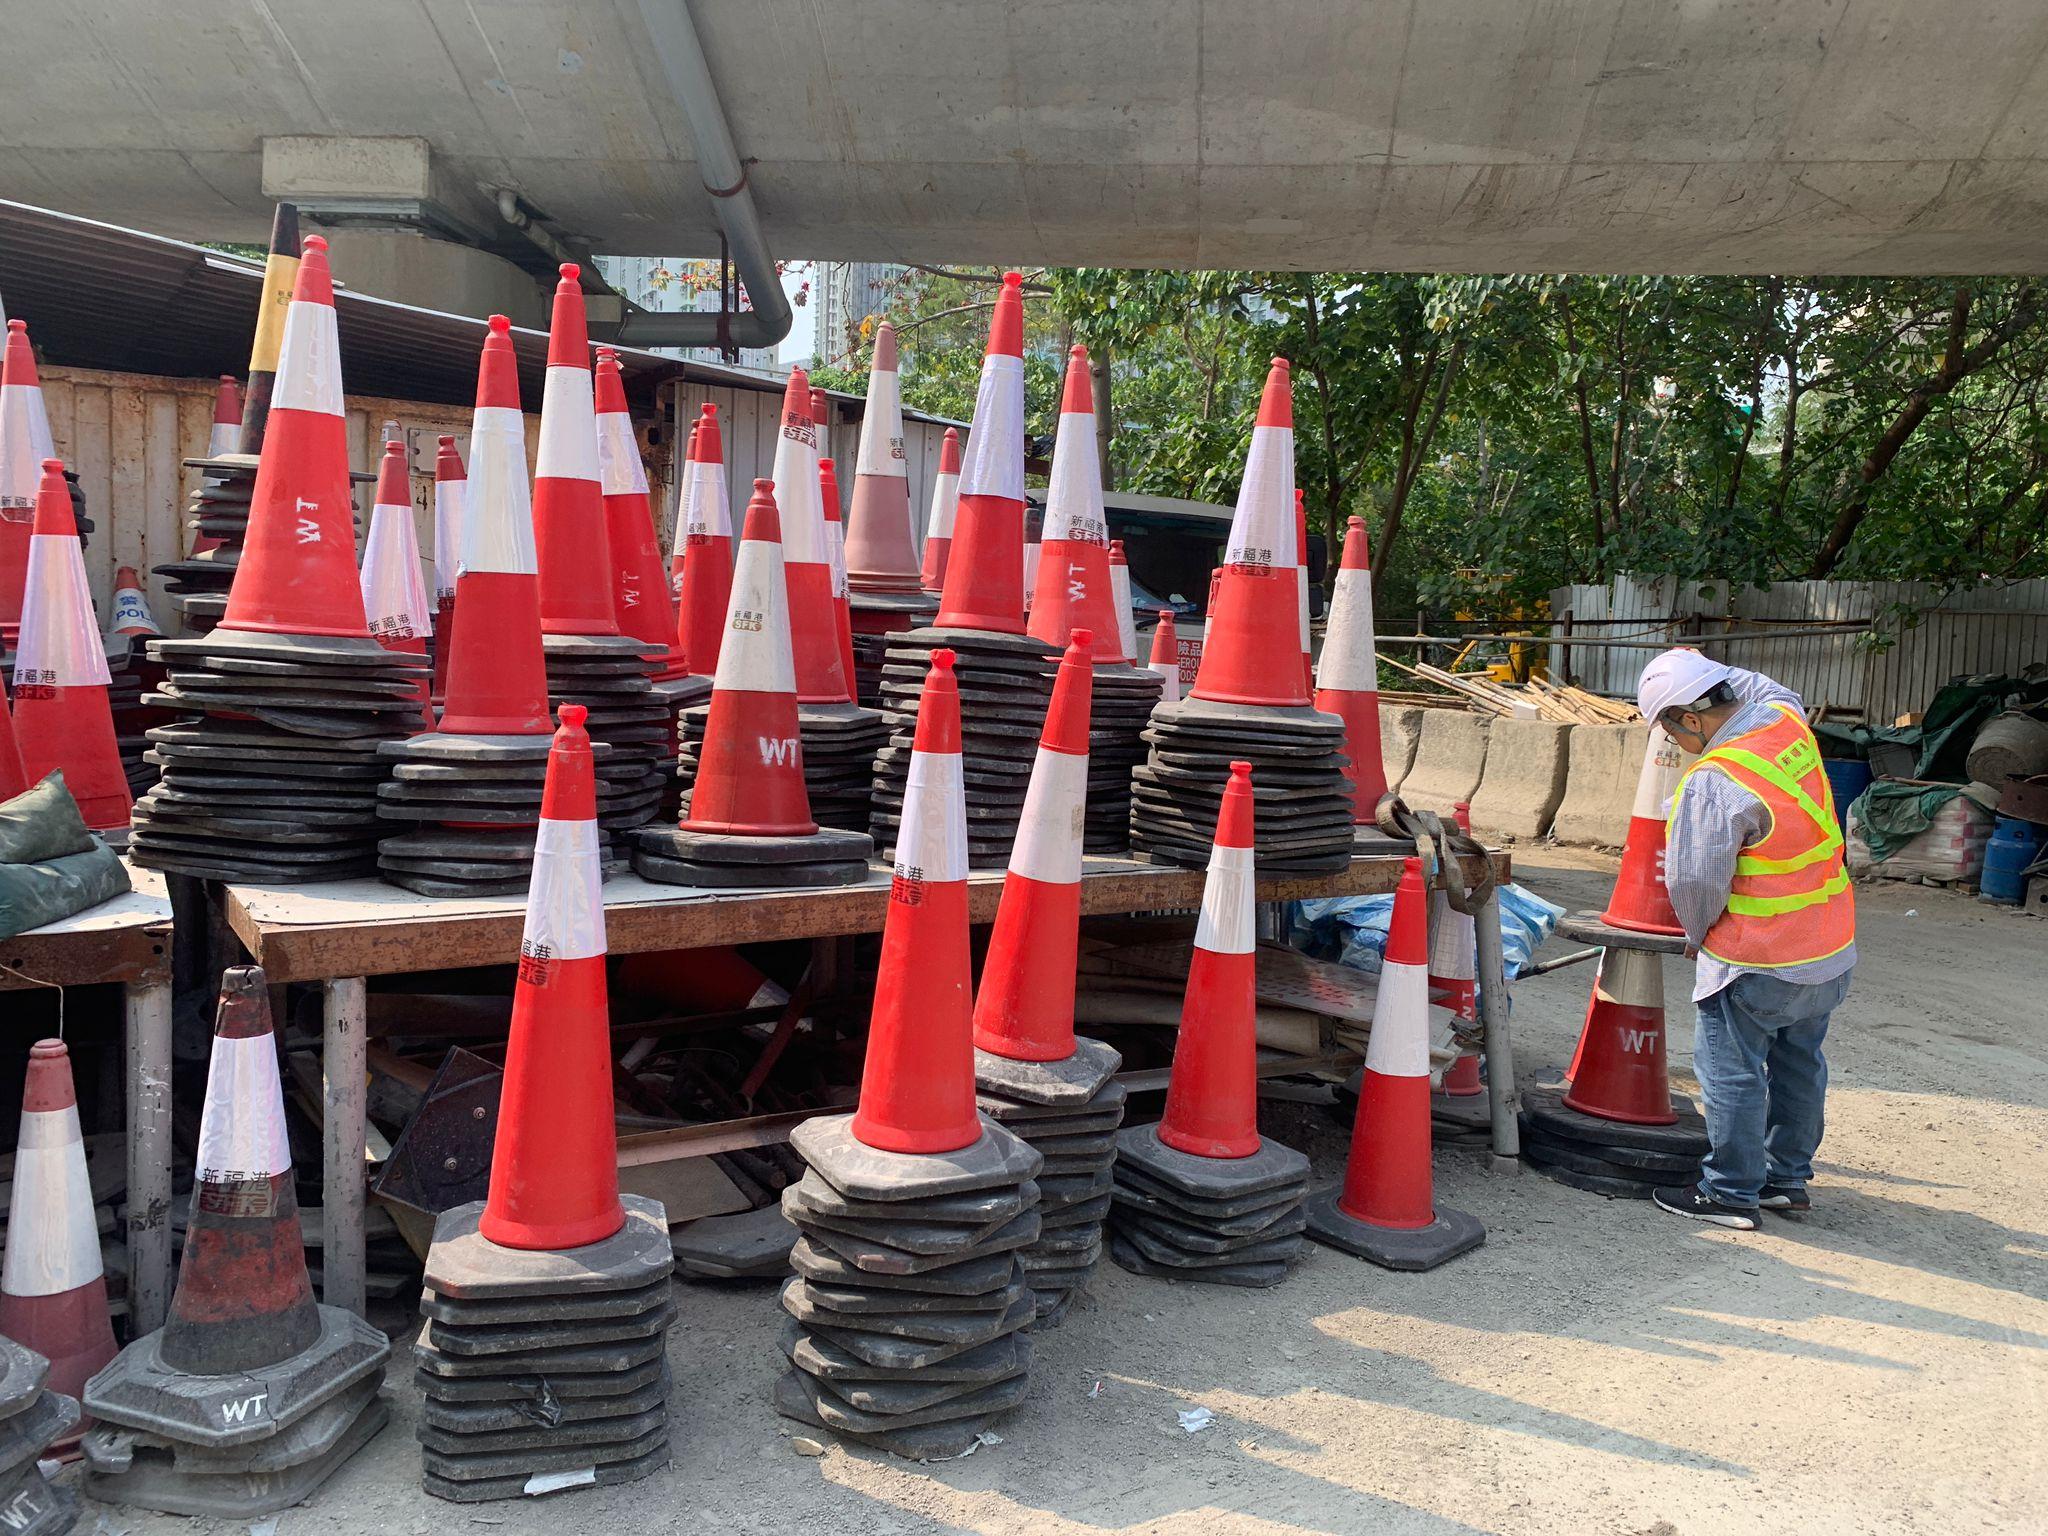 The Emergency Control Centres of the Highways Department today (March 17) conducted a drill to enhance the capability to cope with inclement weather. Photo shows a staff member of a contractor inspecting and stocktaking traffic cones to be used for temporary road closures before the drill.